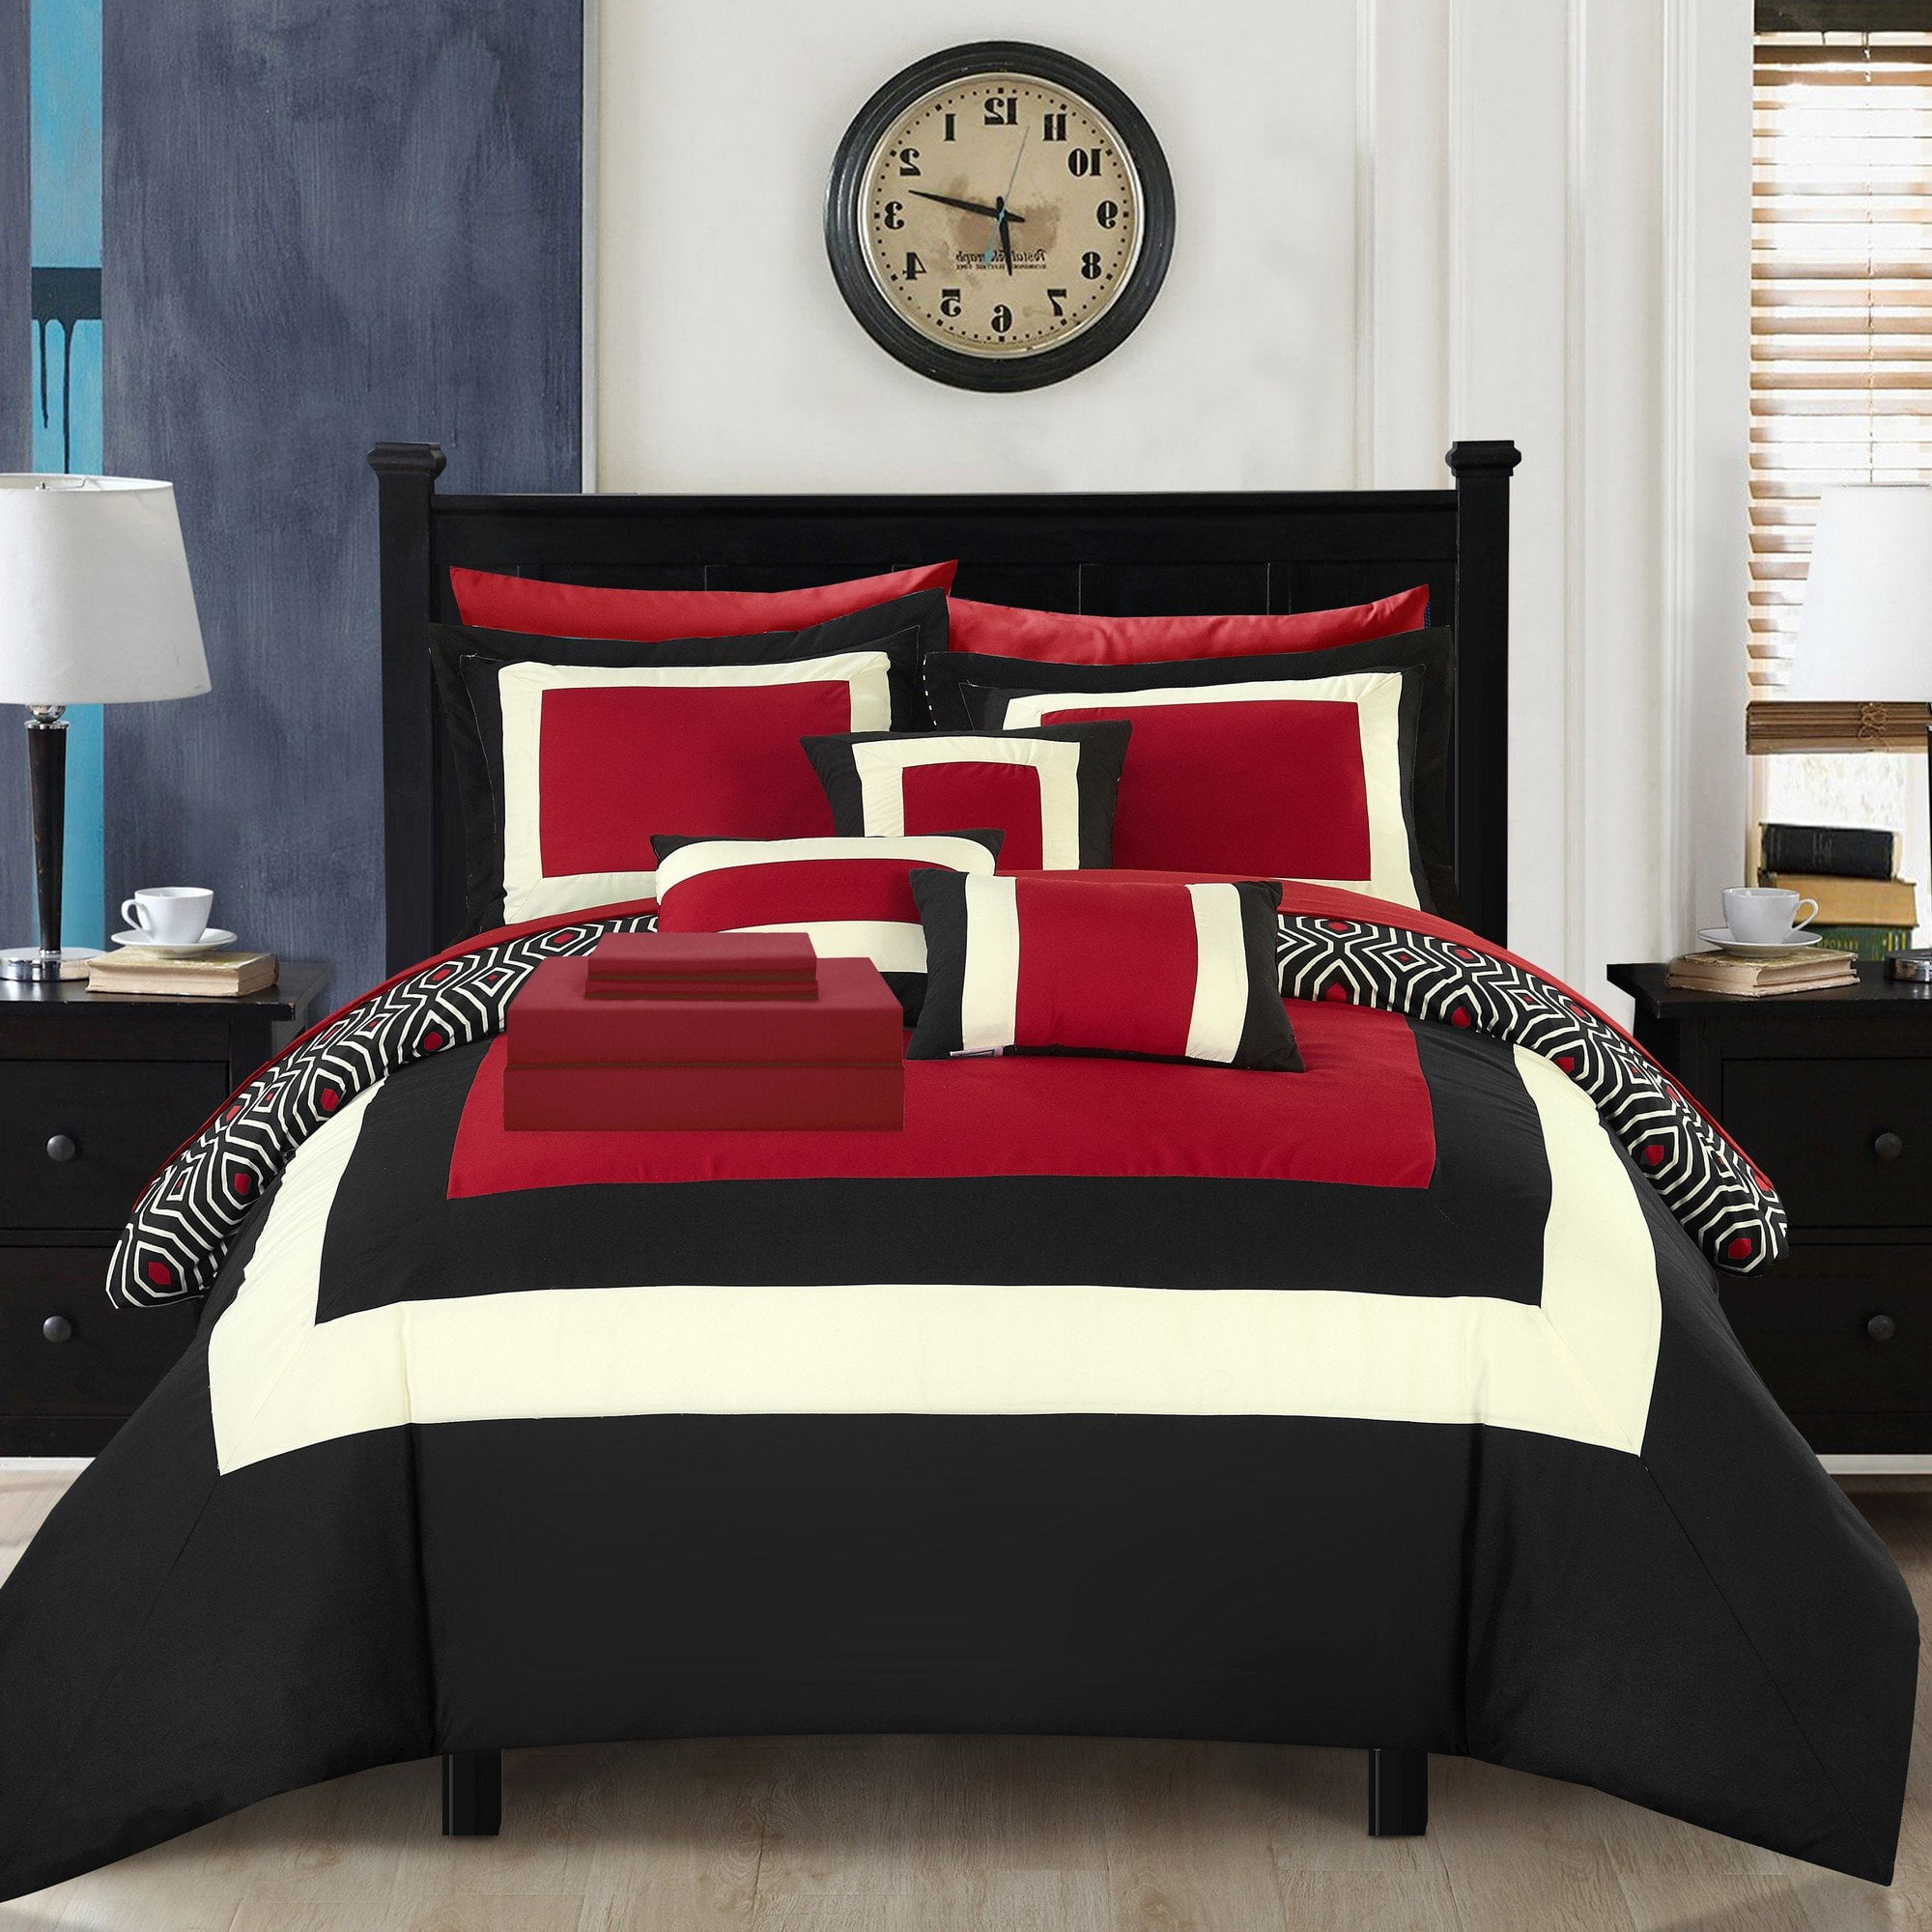 Girlish Style Cute Bedding Sets With Red Bow Pattern Includes Duvet Cover,  Pillowcase, Quilt, And King Size Blanket 220x240 And 200x200 From  Davidwesley, $29.47